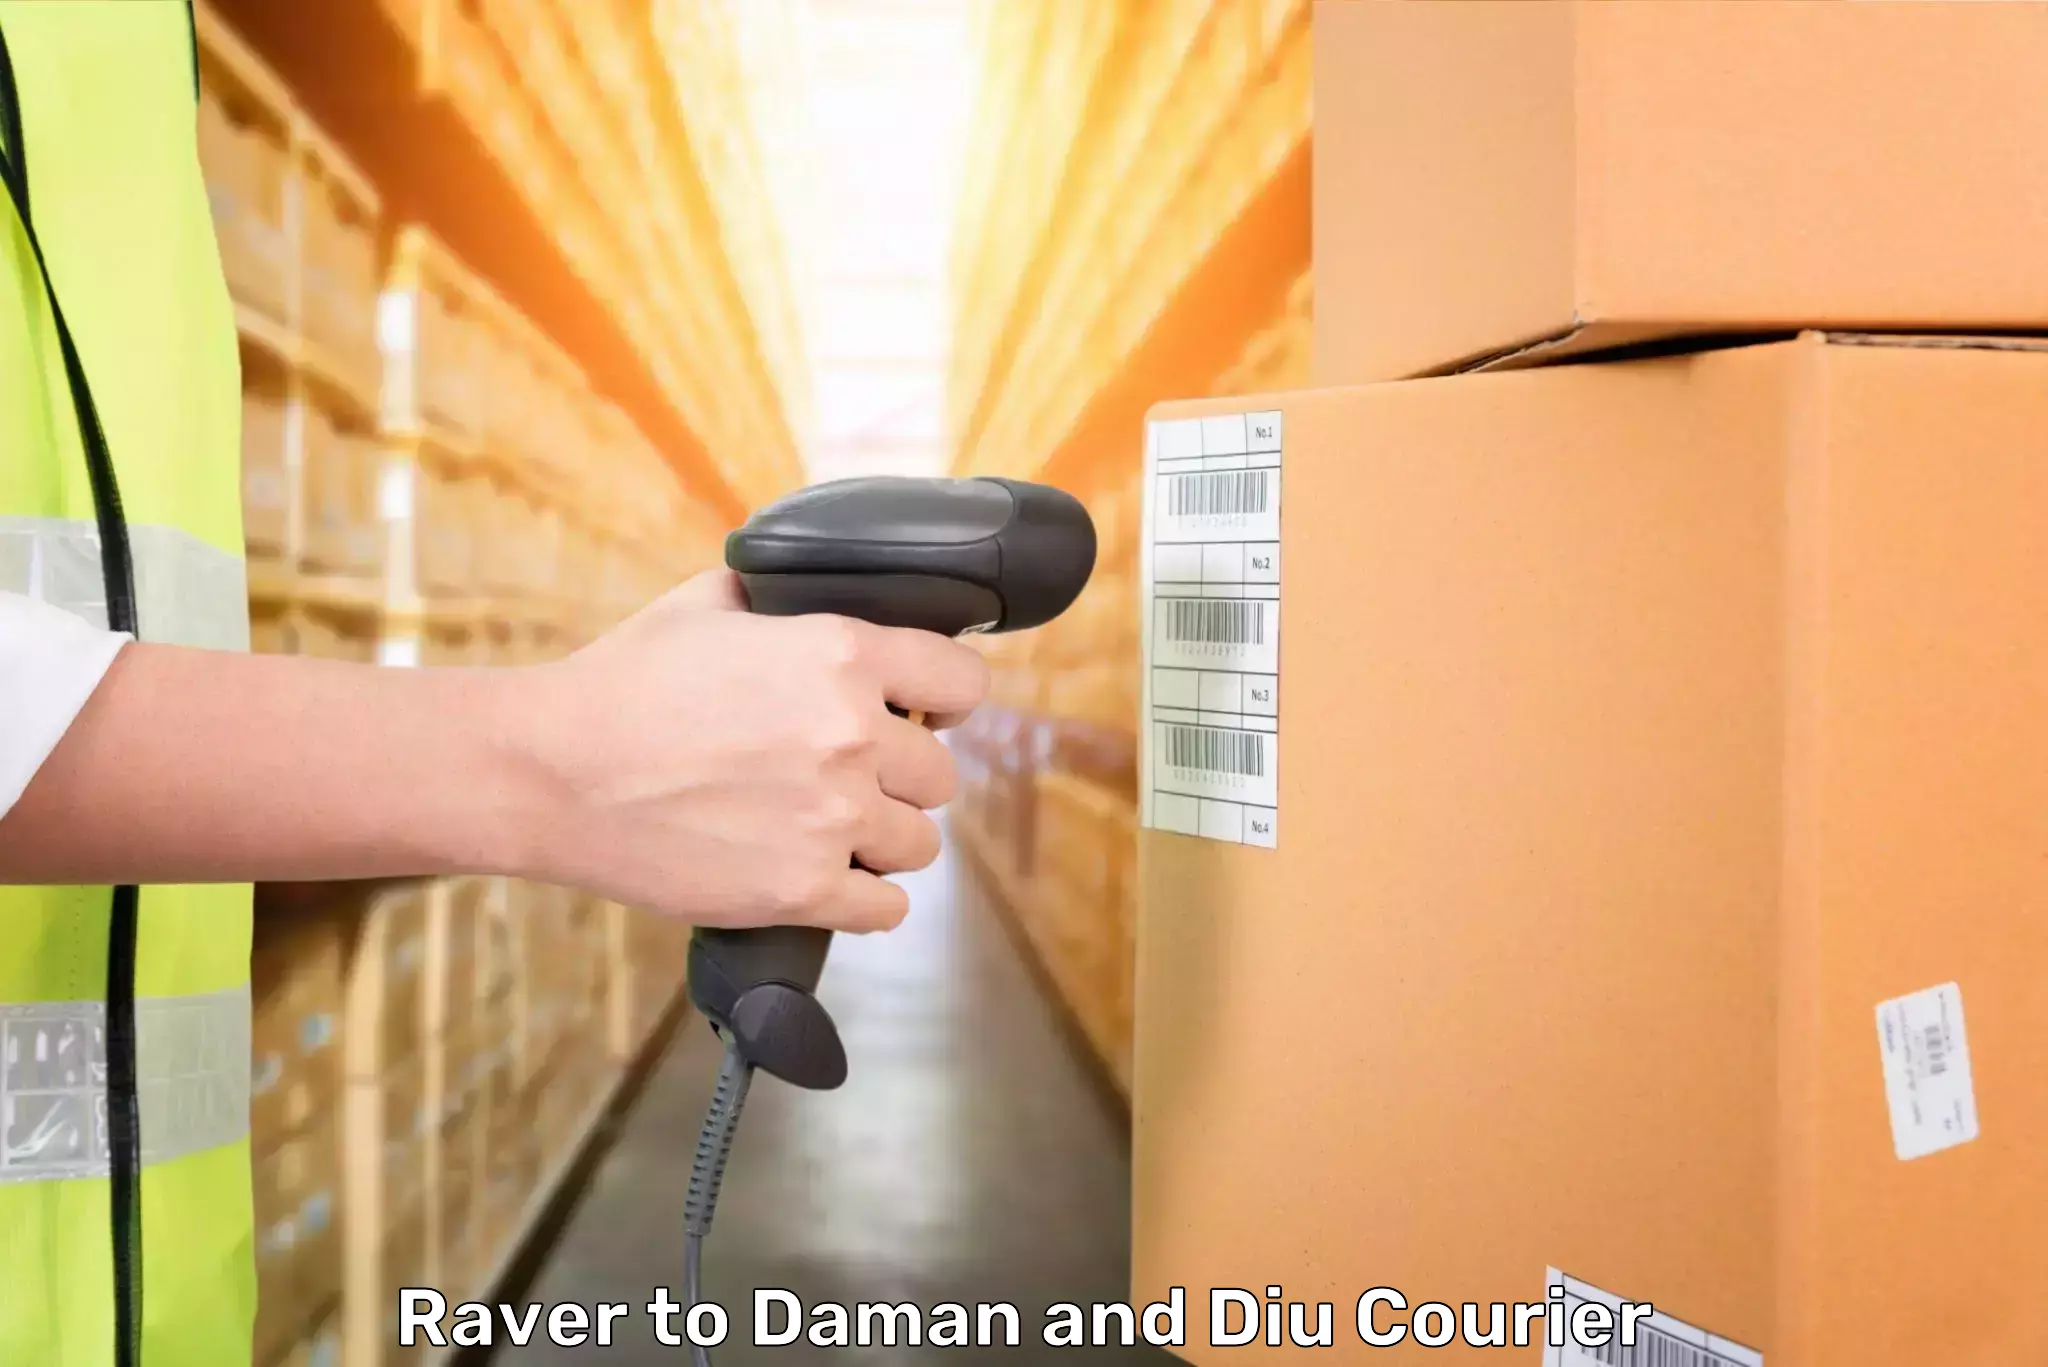 Luggage transport consultancy Raver to Diu